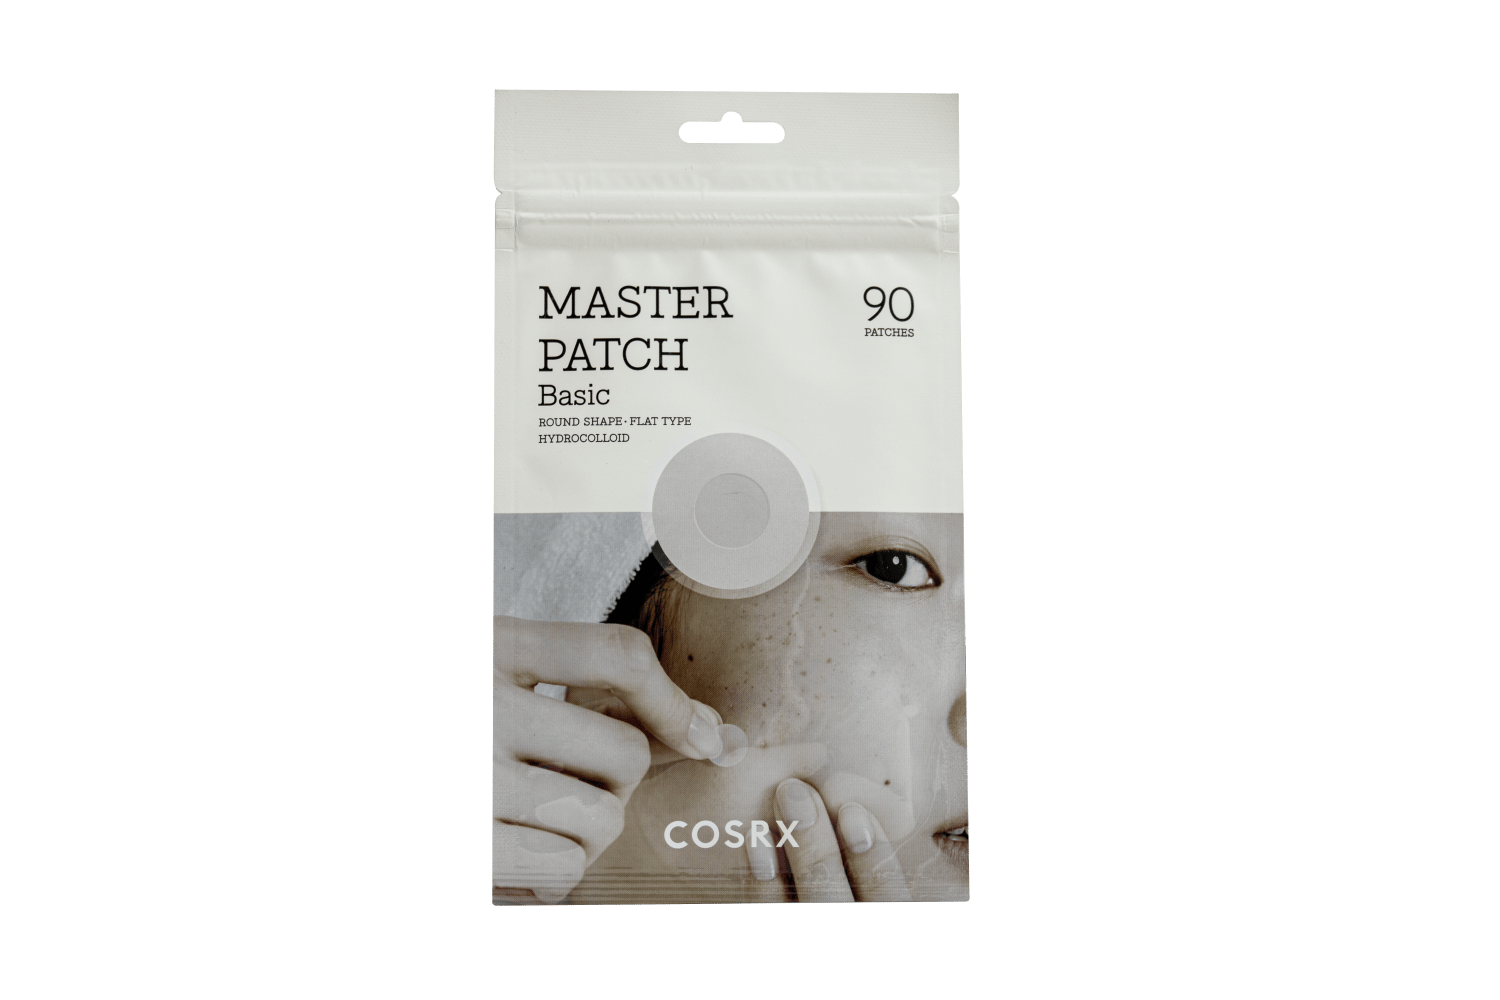 COSRX MASTER PATCH BASIC (90 PATCHES)